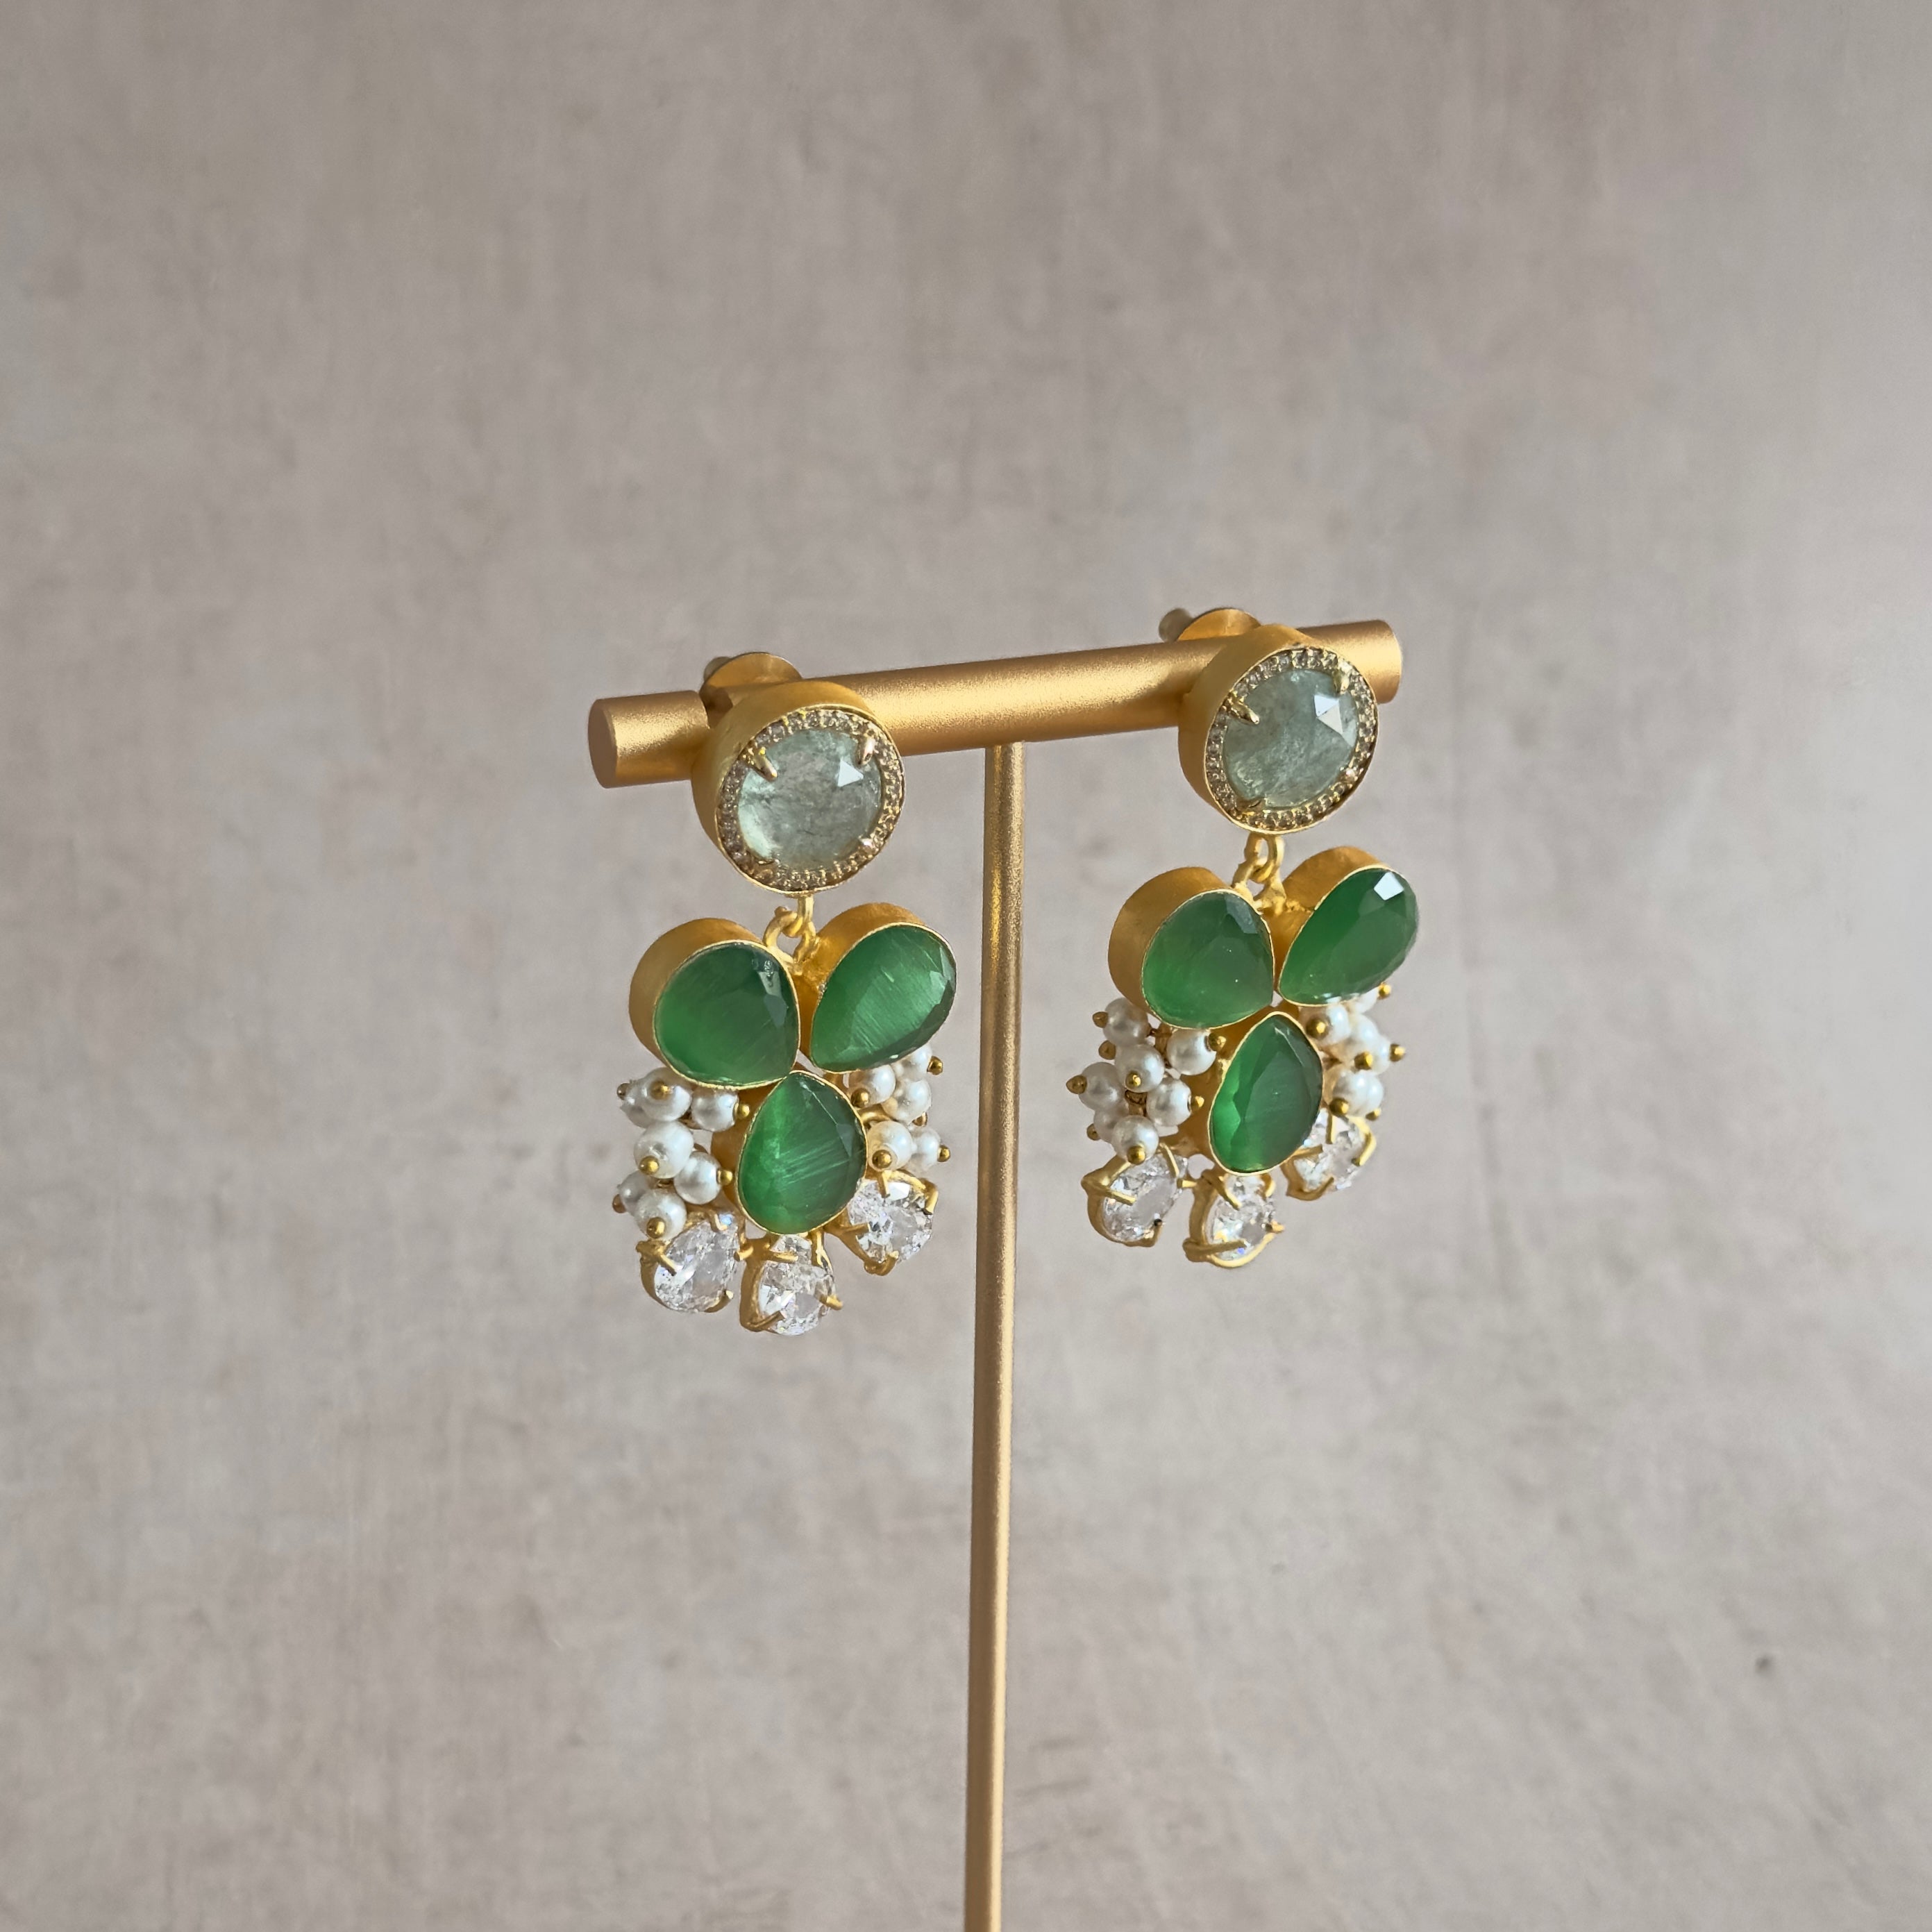 Elevate your style with the stunning Sirena Green Stud Earrings! These earrings feature mesmerizing vibrant hues of green and aquamarine, accentuated with sparkling cubic zirconia. Perfect for any occasion.